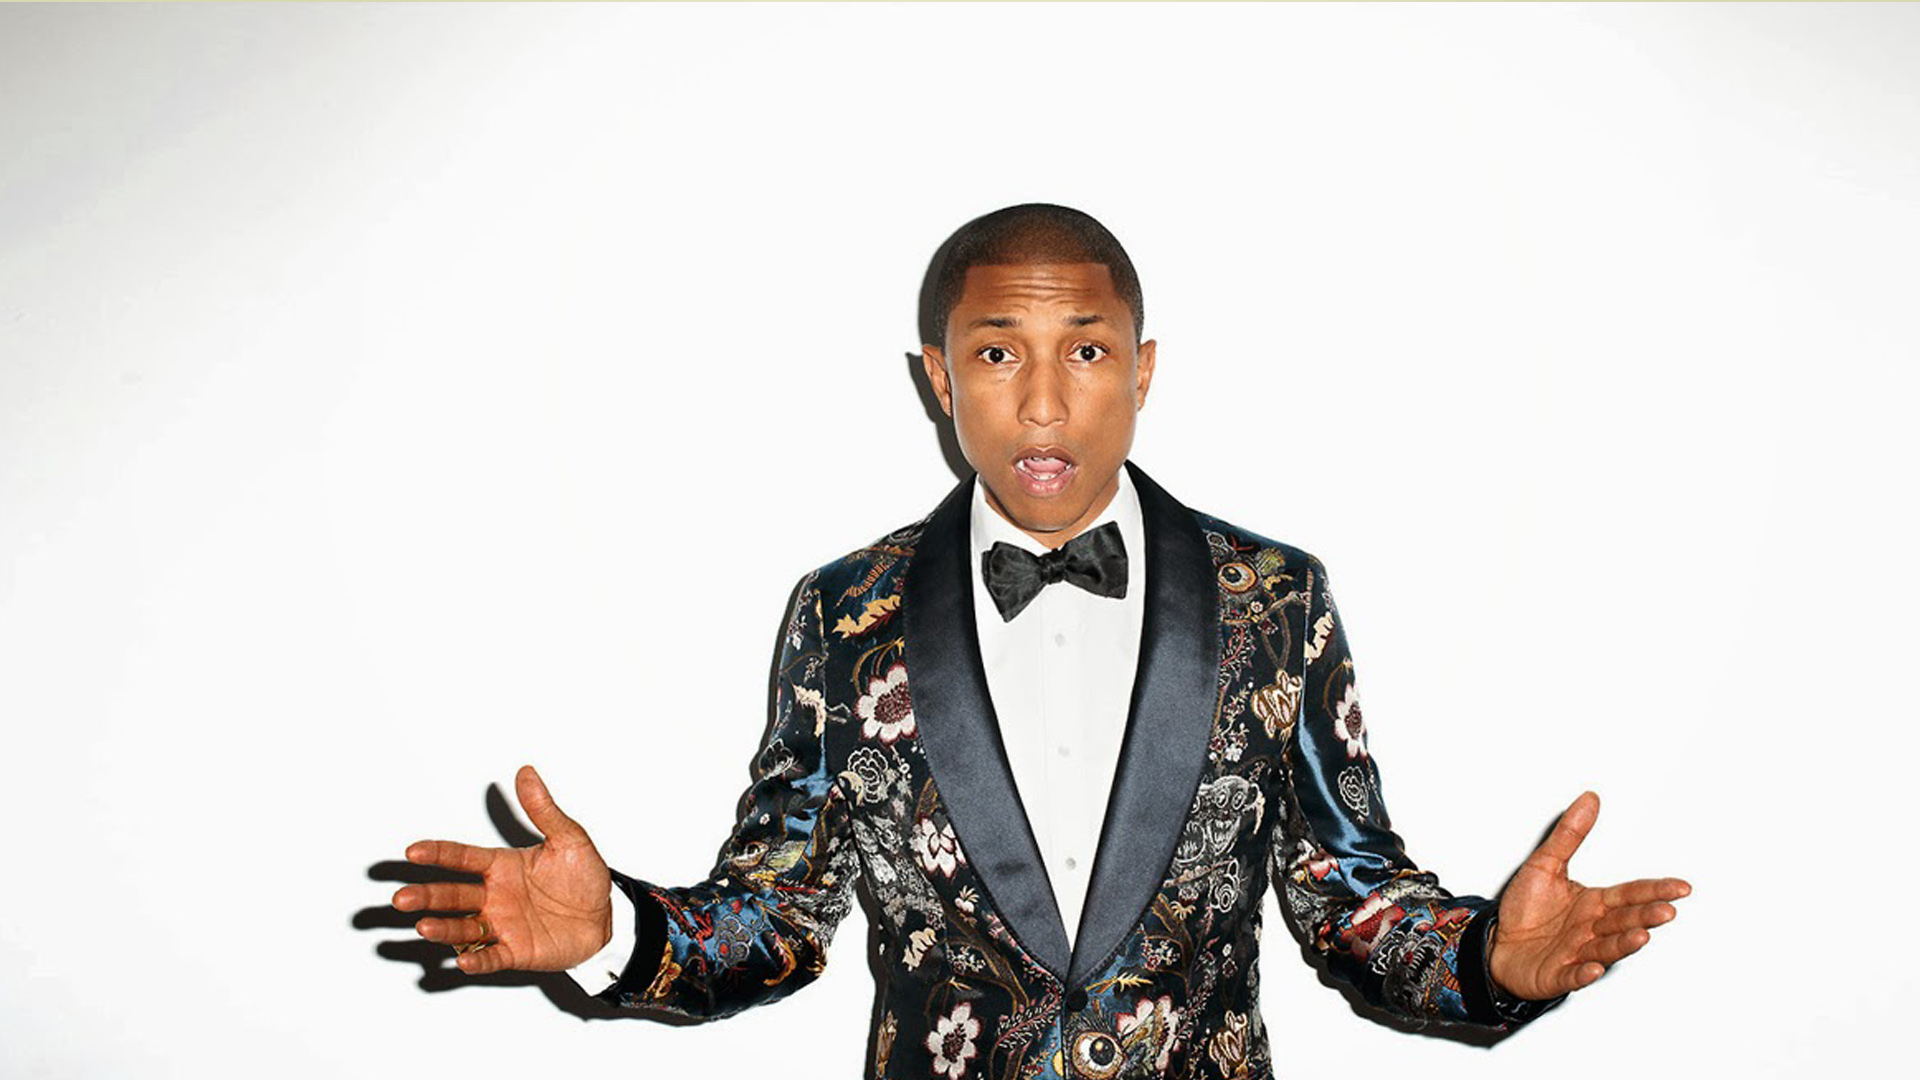 1920x1080 Free download HD Pharrell Williams Wallpapers HdCoolWallpapersCom [] for your Desktop, Mobile \u0026 Tablet | Explore 75+ Pharrell Williams Wallpapers | Pharrell Williams Wallpaper, Pharrell Williams Wallpapers, Pharrell Wallpaper